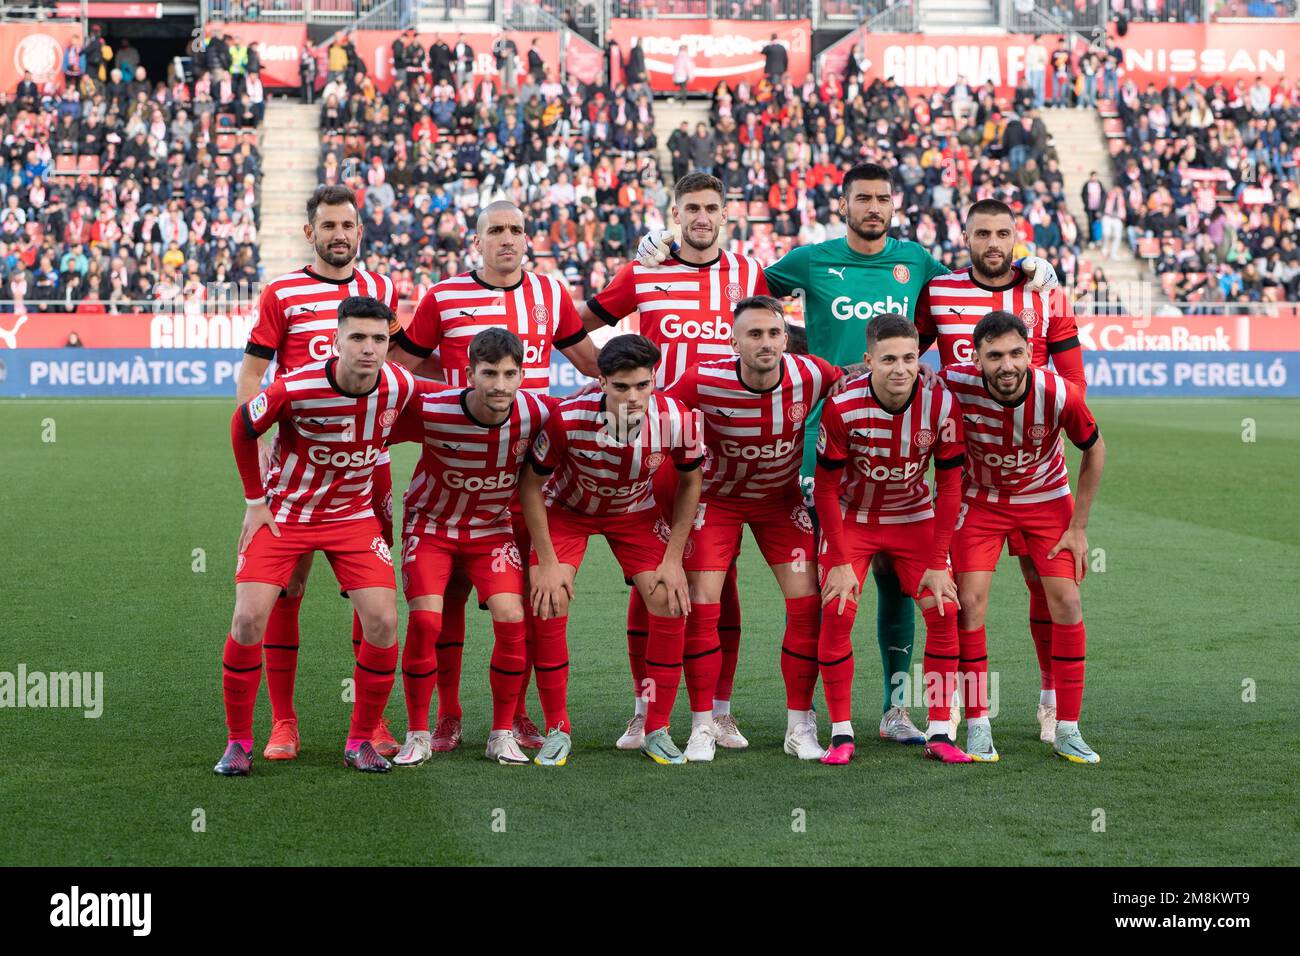 Girona, Spain : January 14, 2023 : Girona FC Players Formation during the  during the LaLiga Smartbank match